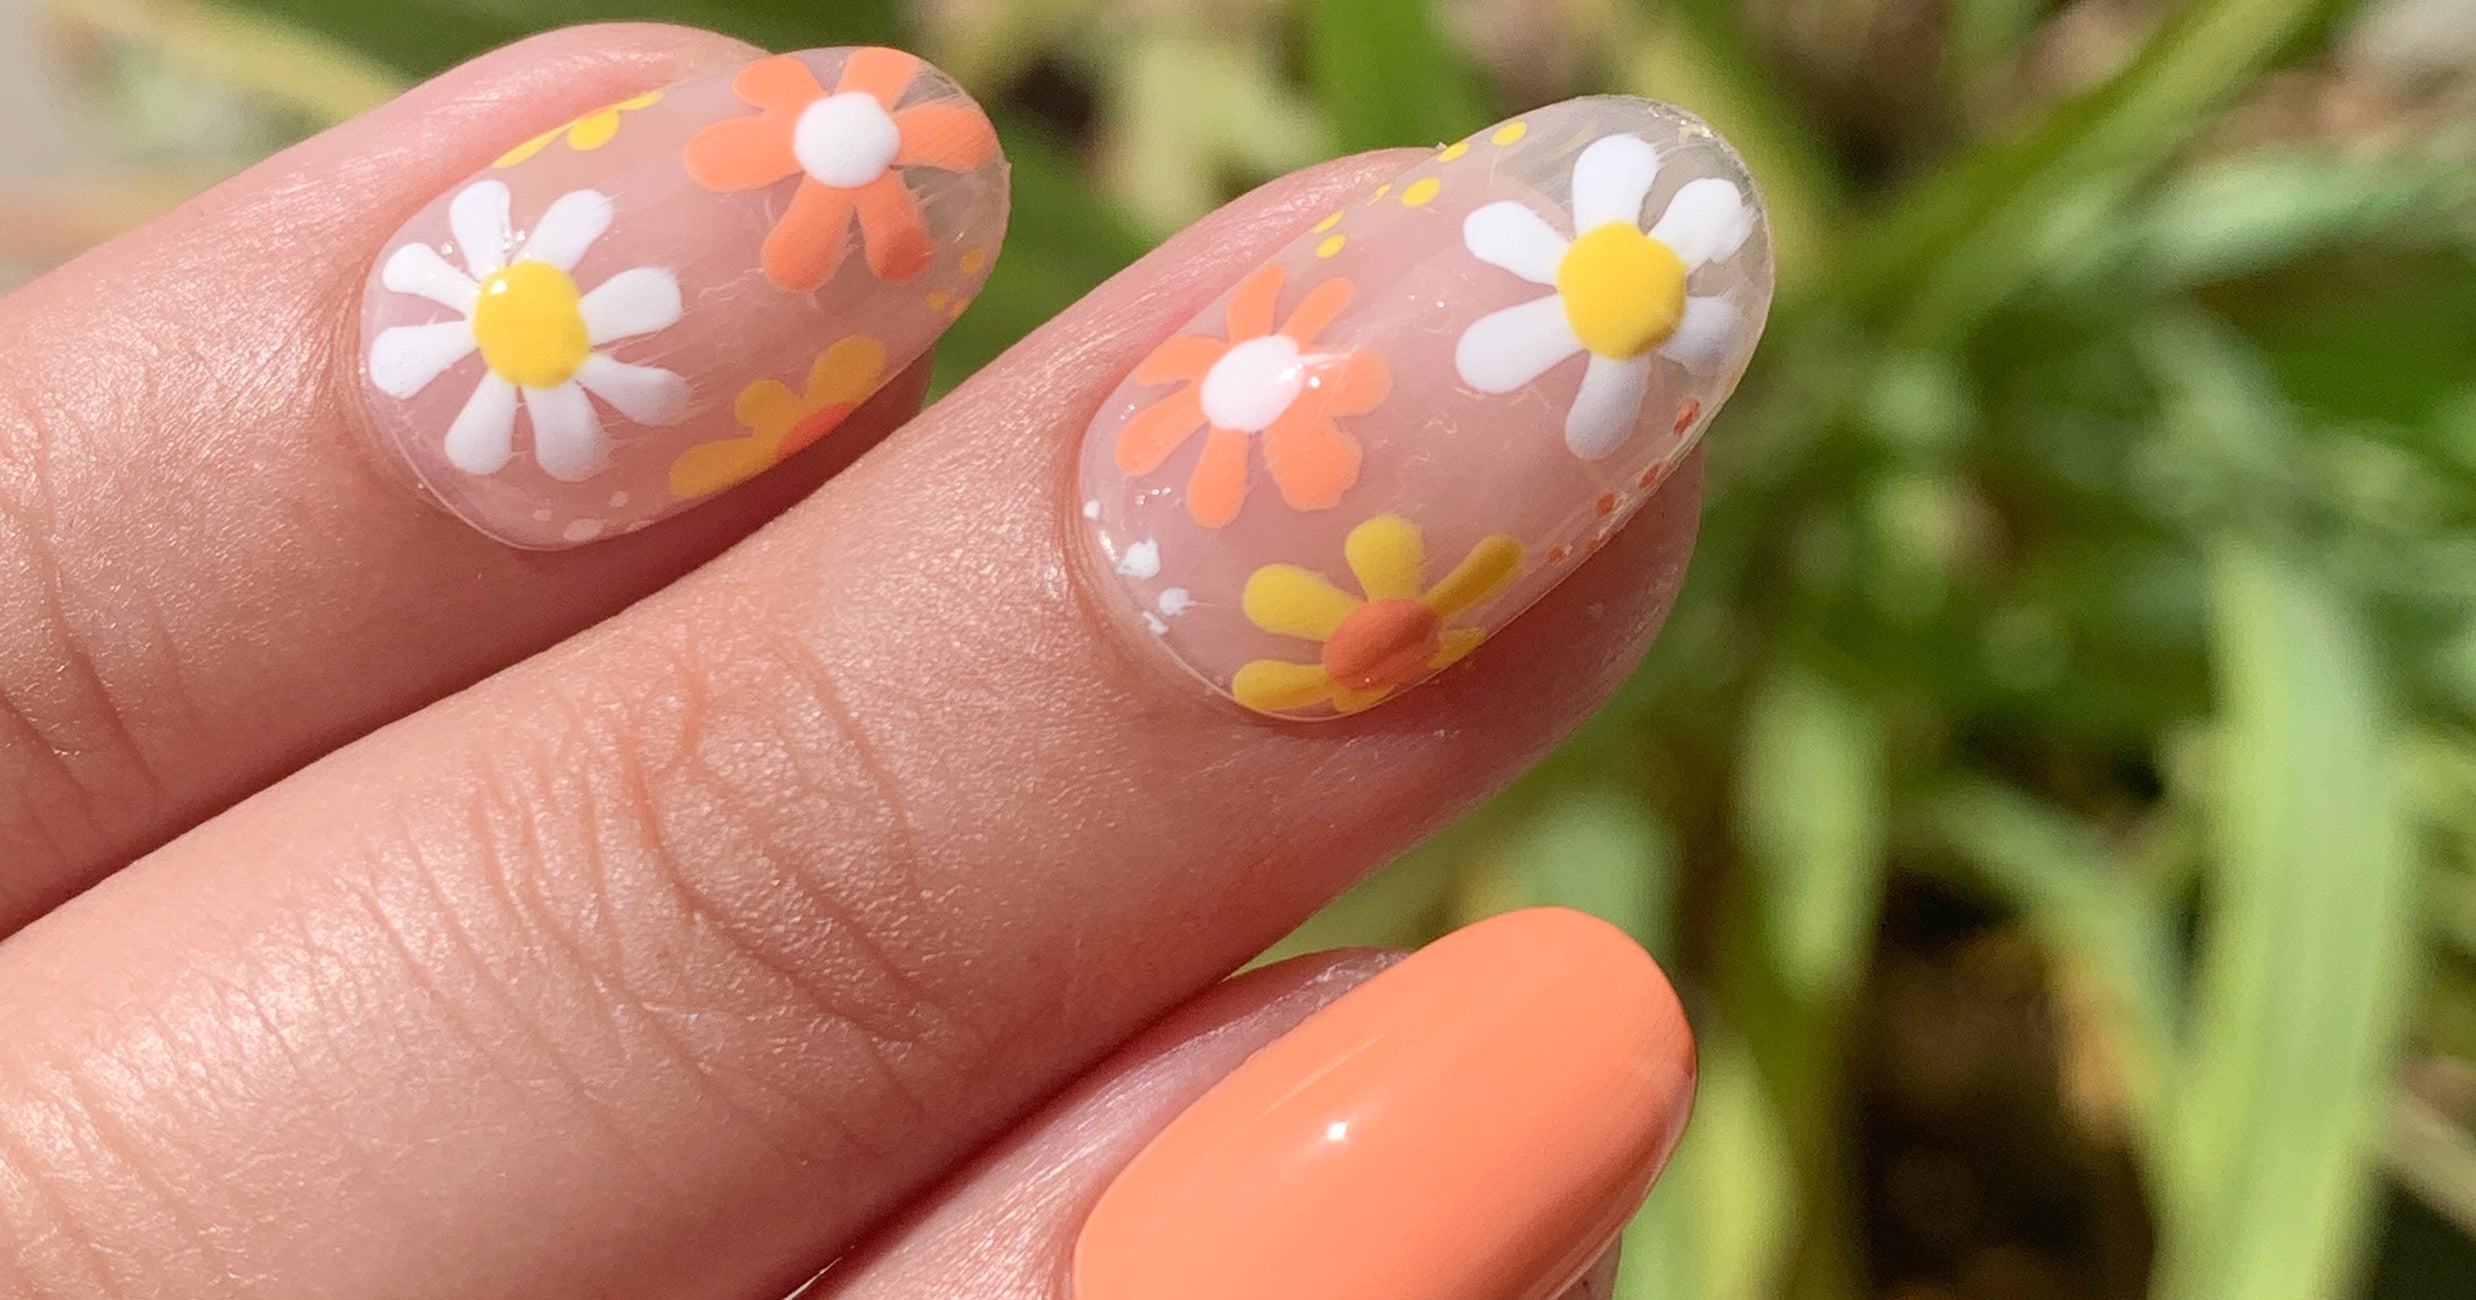 Spring Nail Art Designs for Short Nails - wide 9